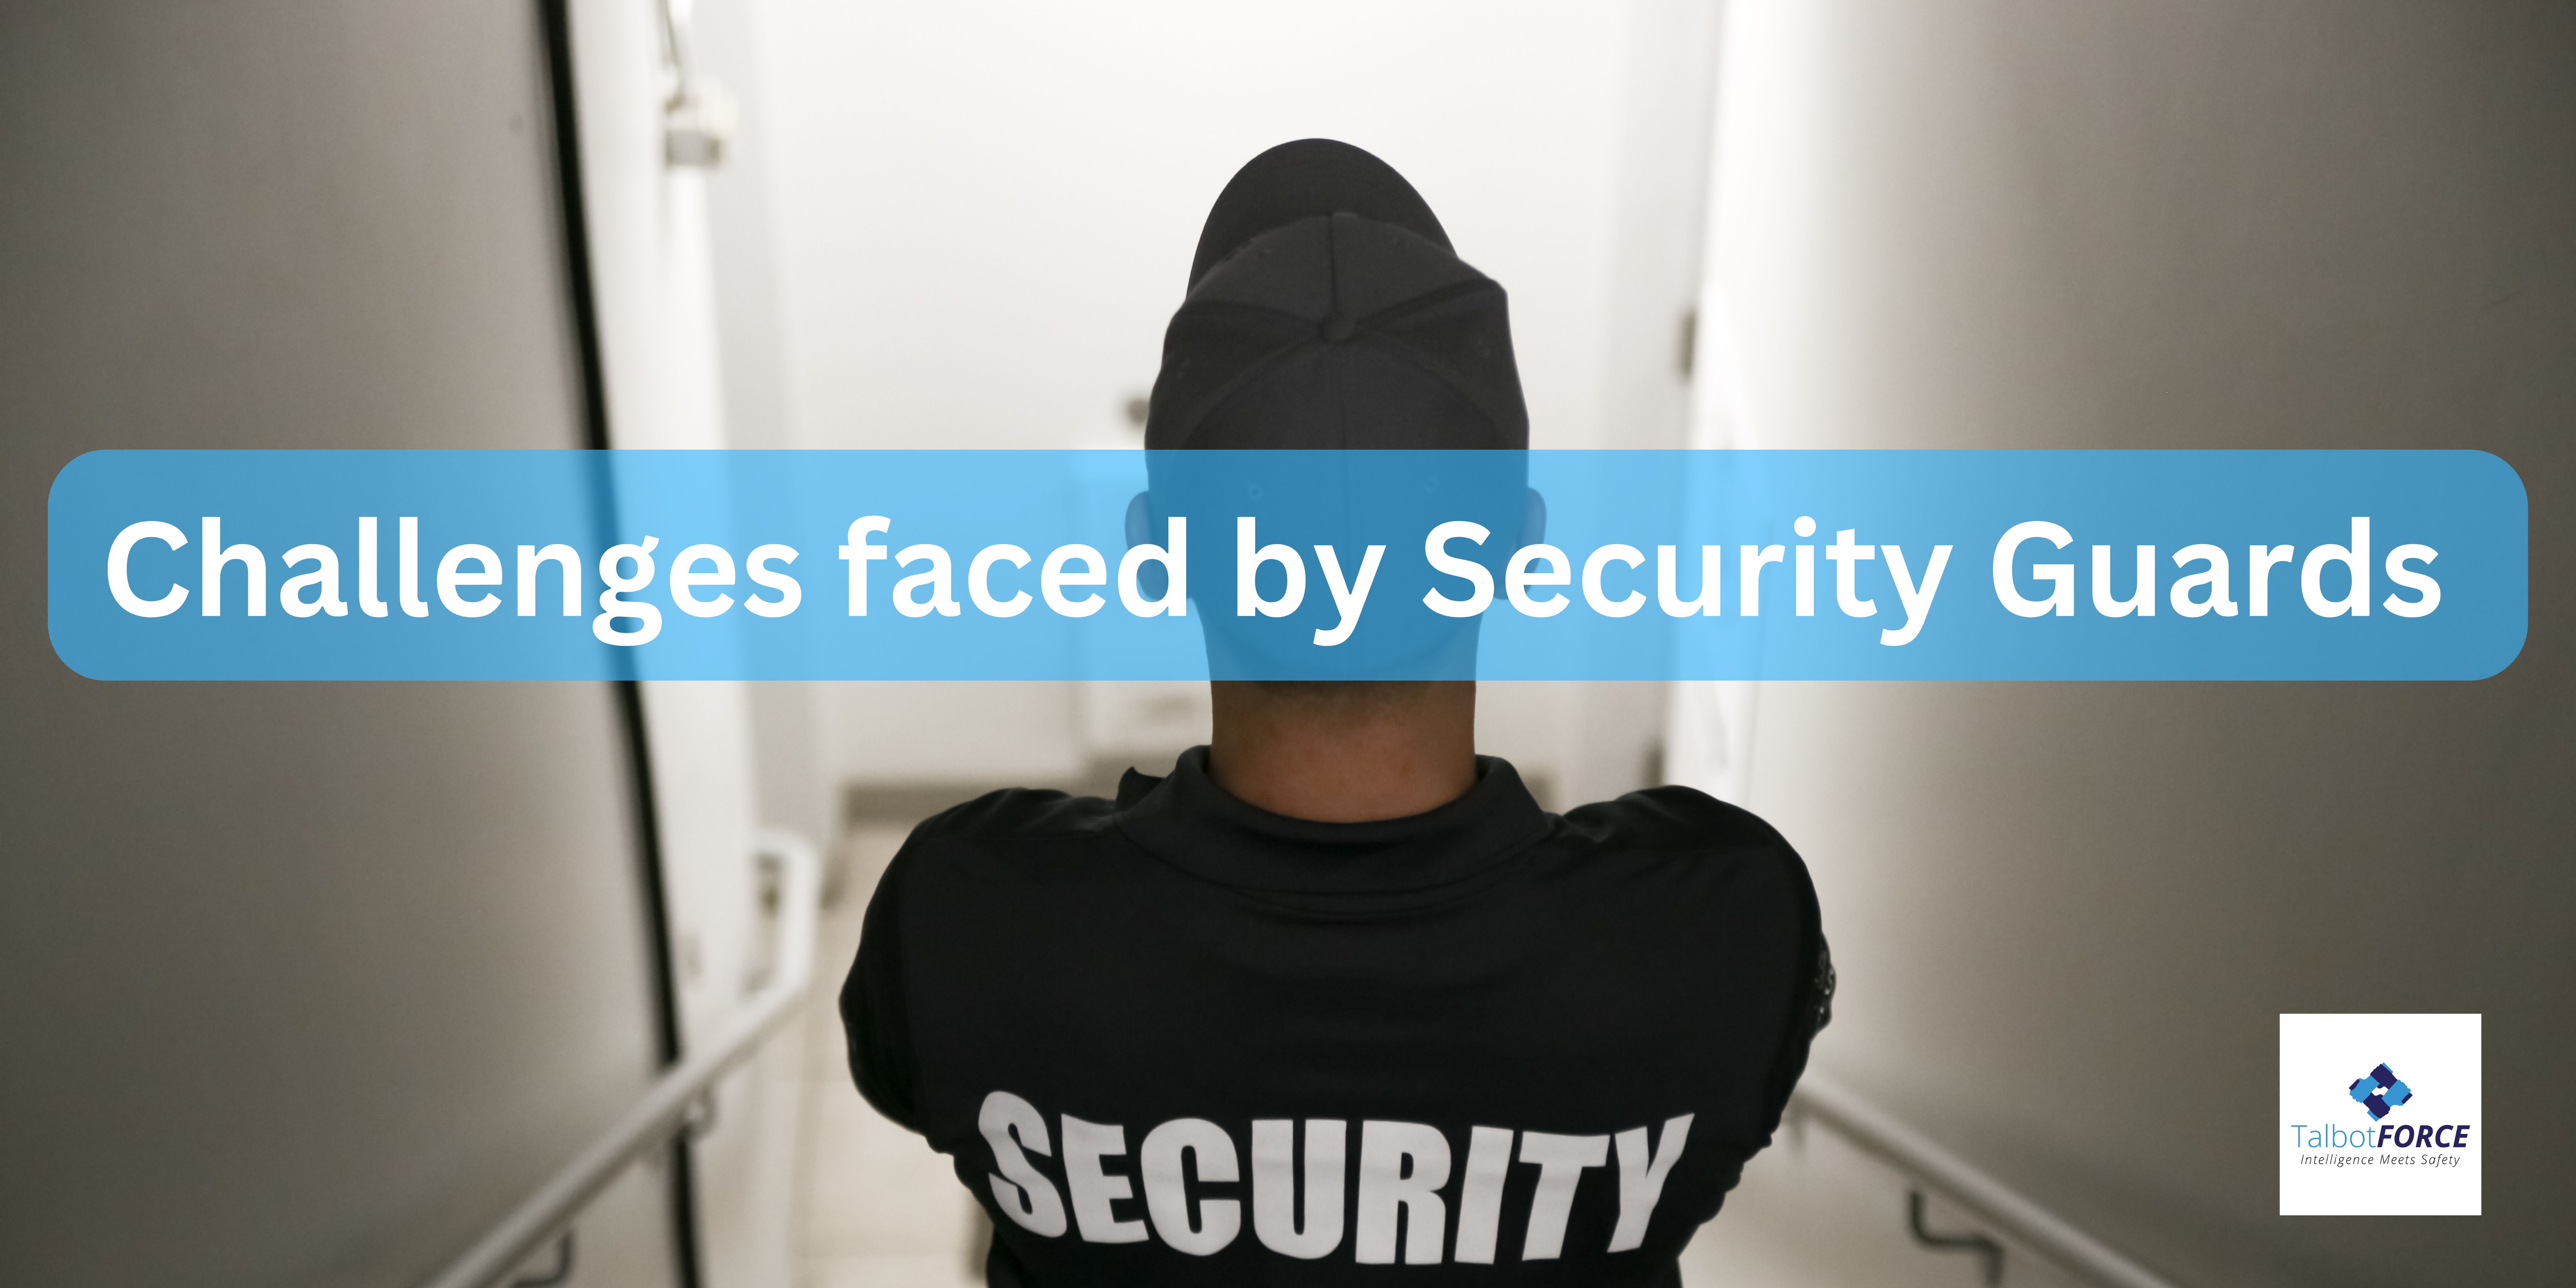 Challenges faced by Security Guards